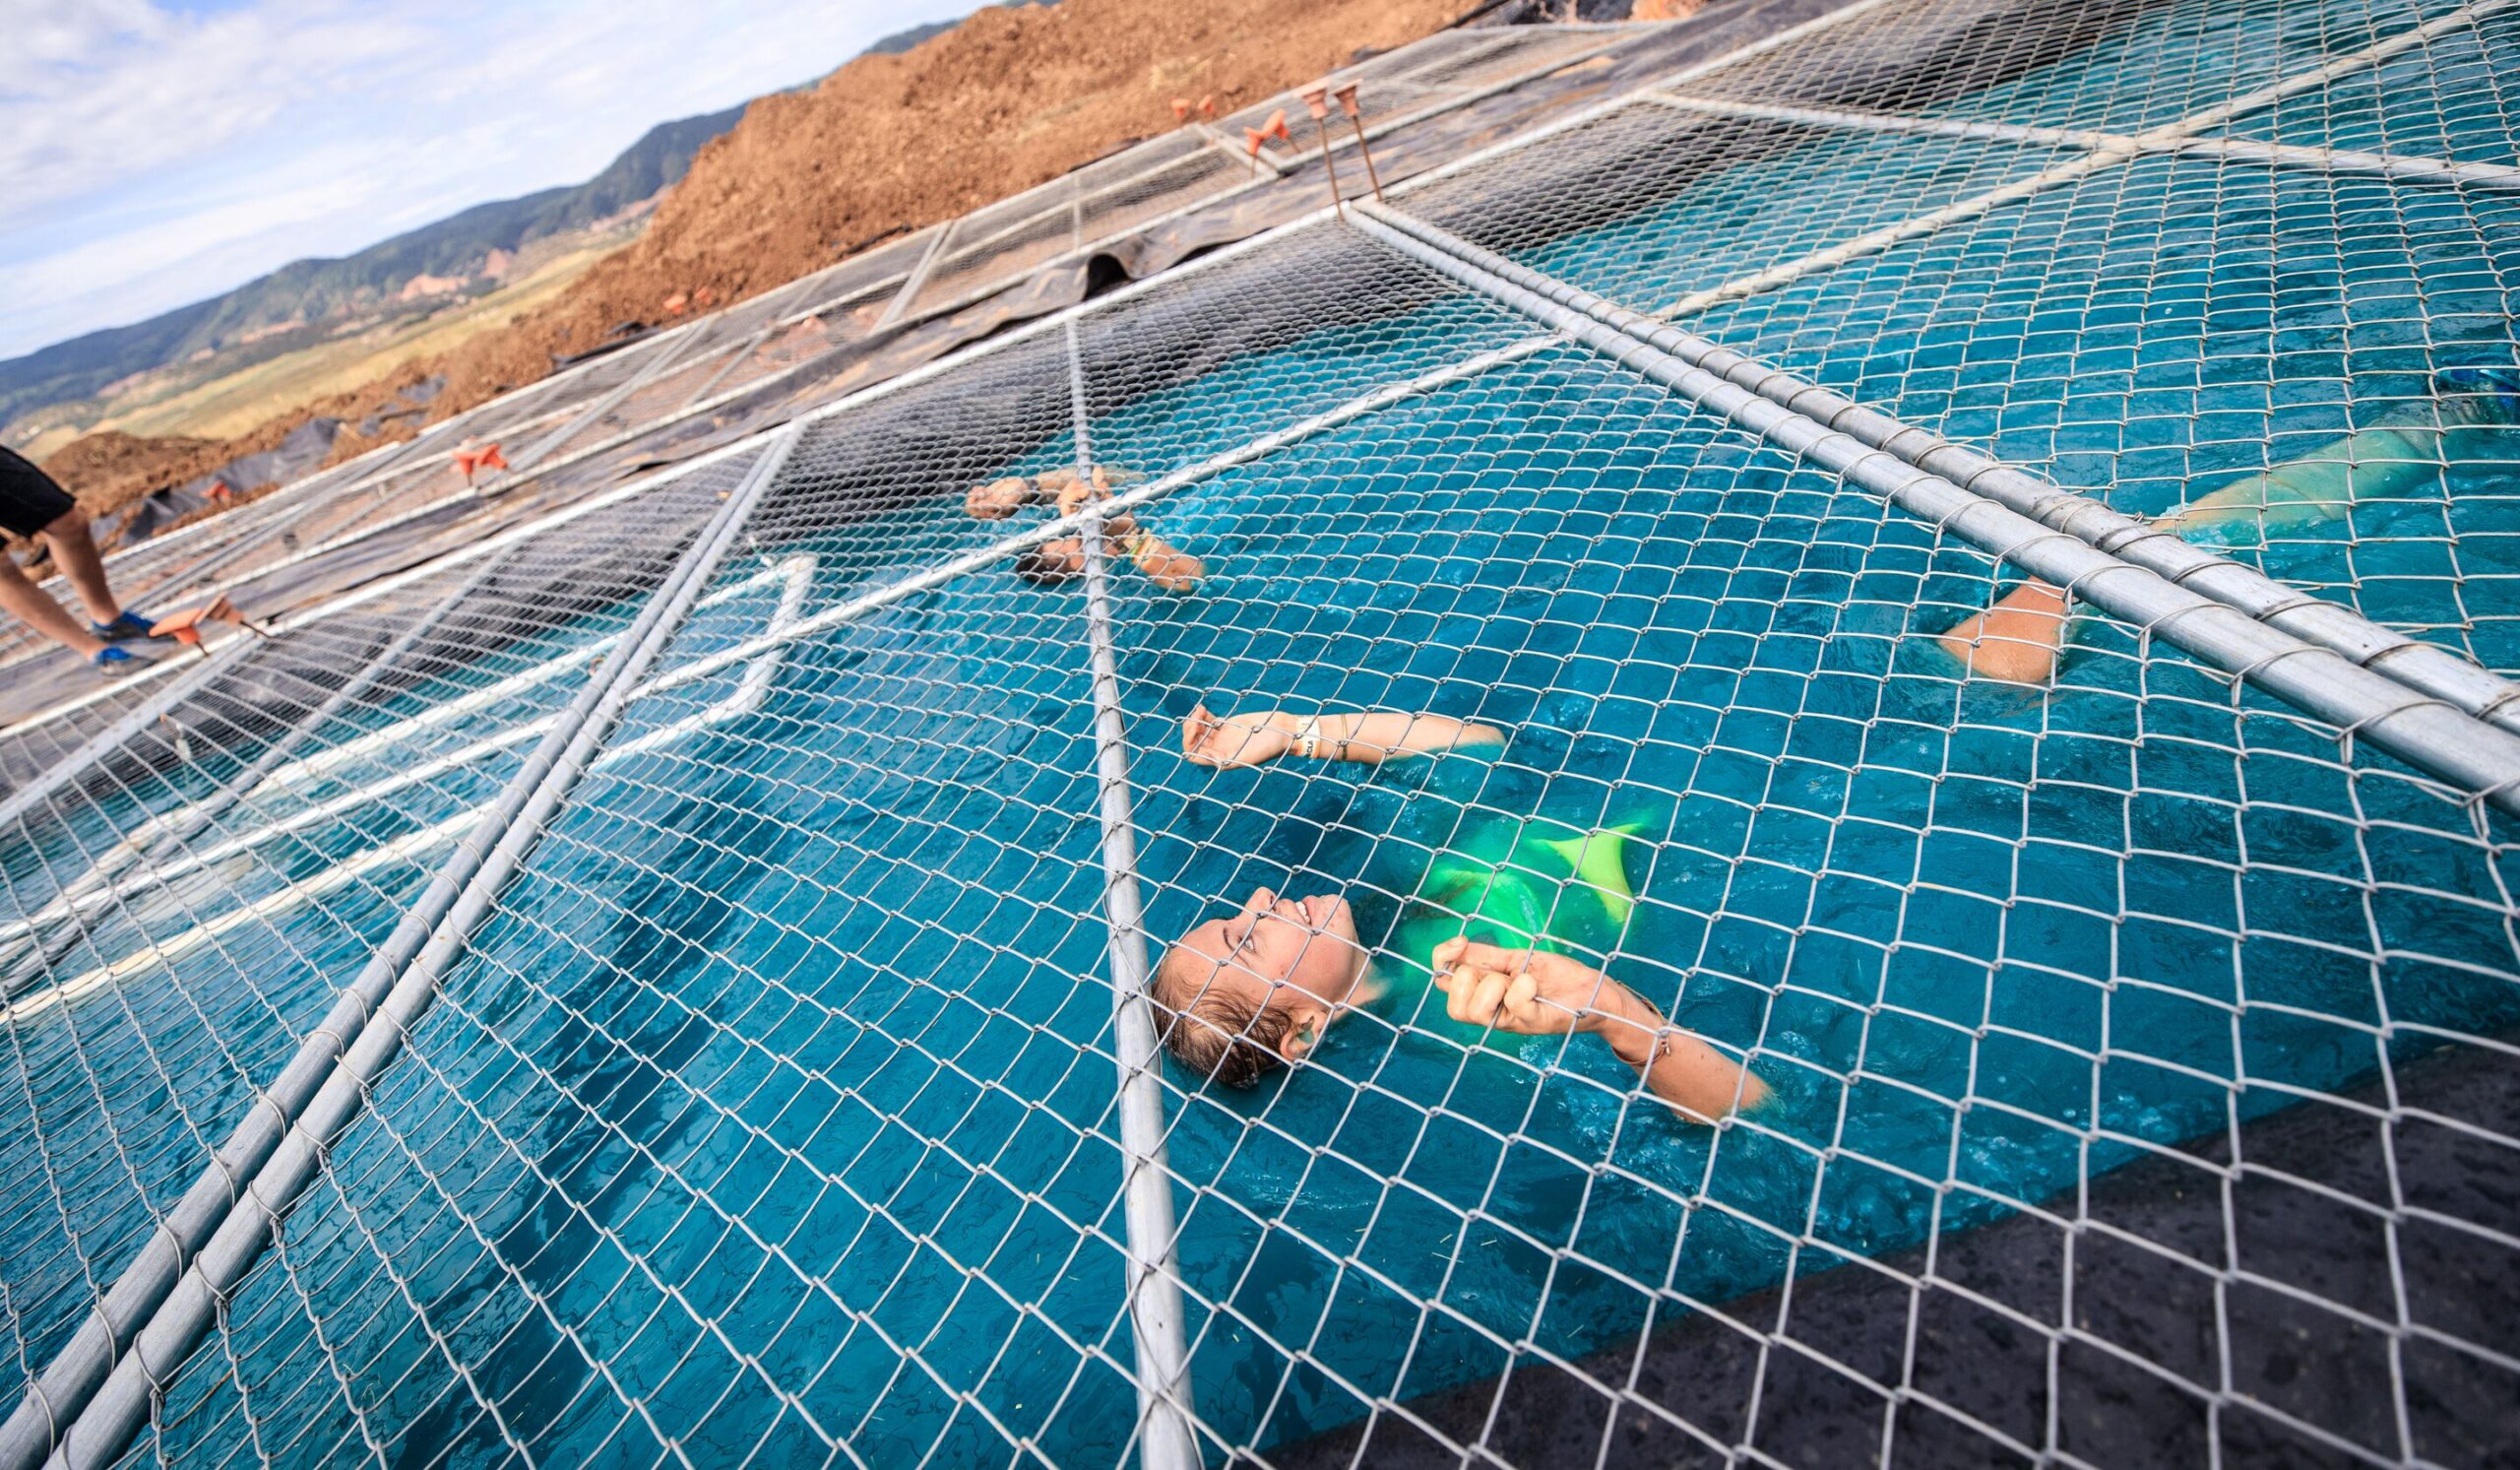 Tough Mudder Cage Crawl Obstacle